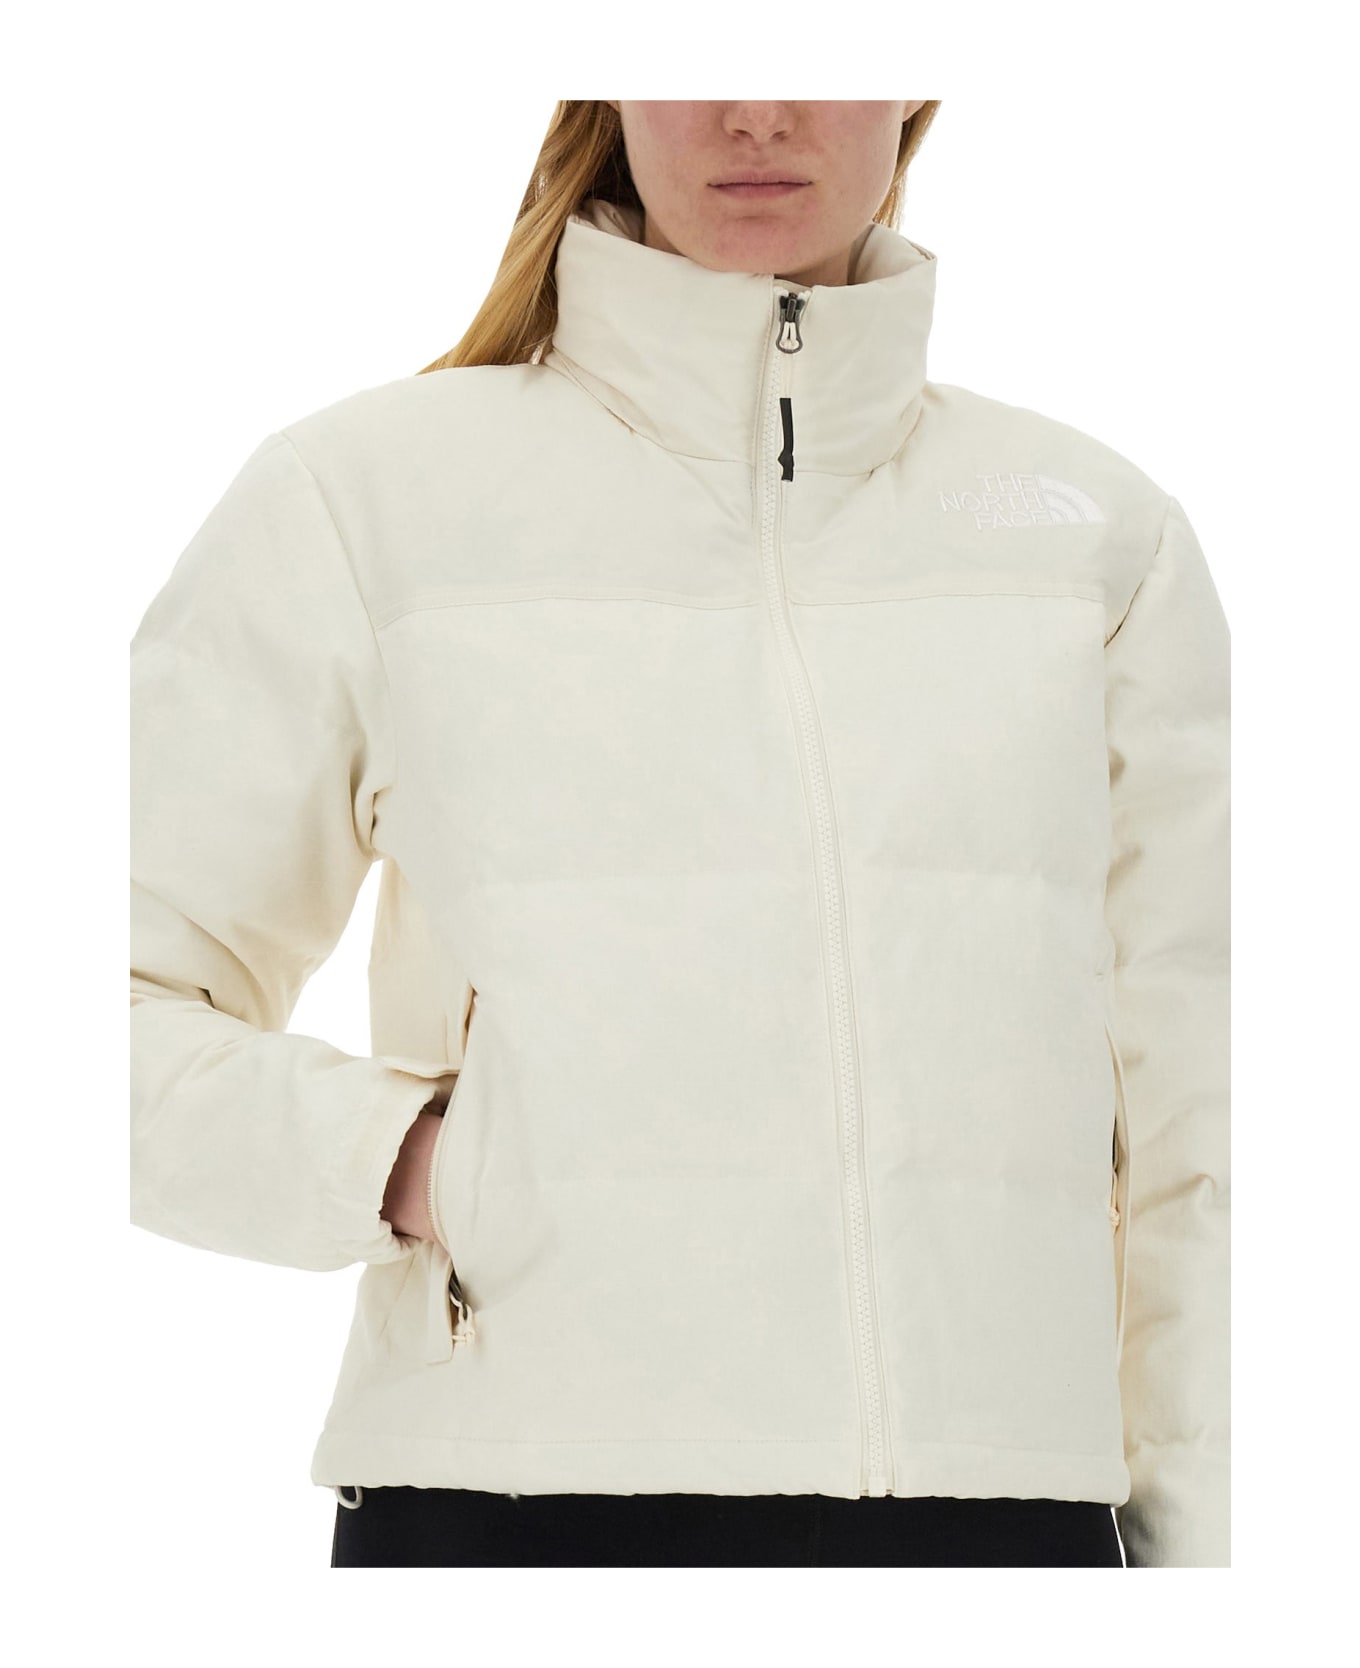 The North Face Jacket With Logo - WHITE ダウンジャケット